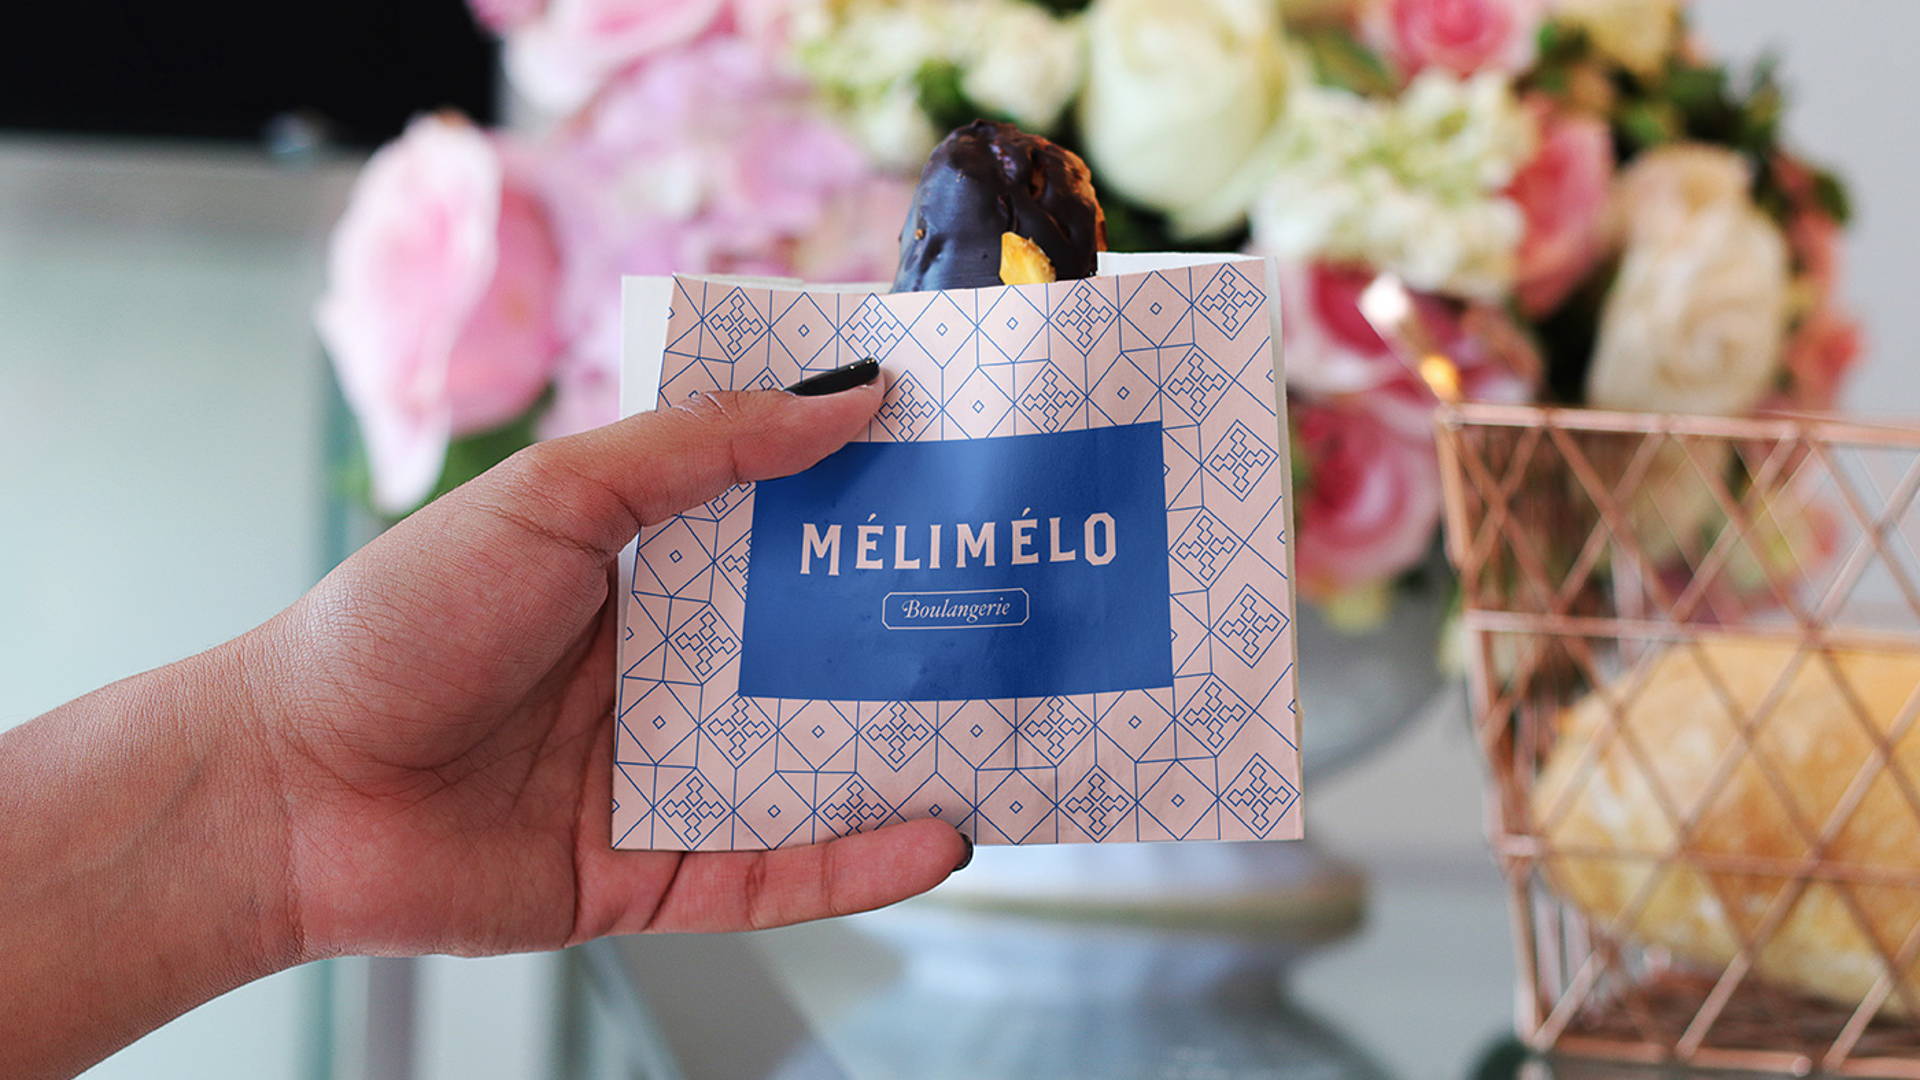 Featured image for This Feminine Pastry Shop Branding Comes With Wonderful Geometric Elements